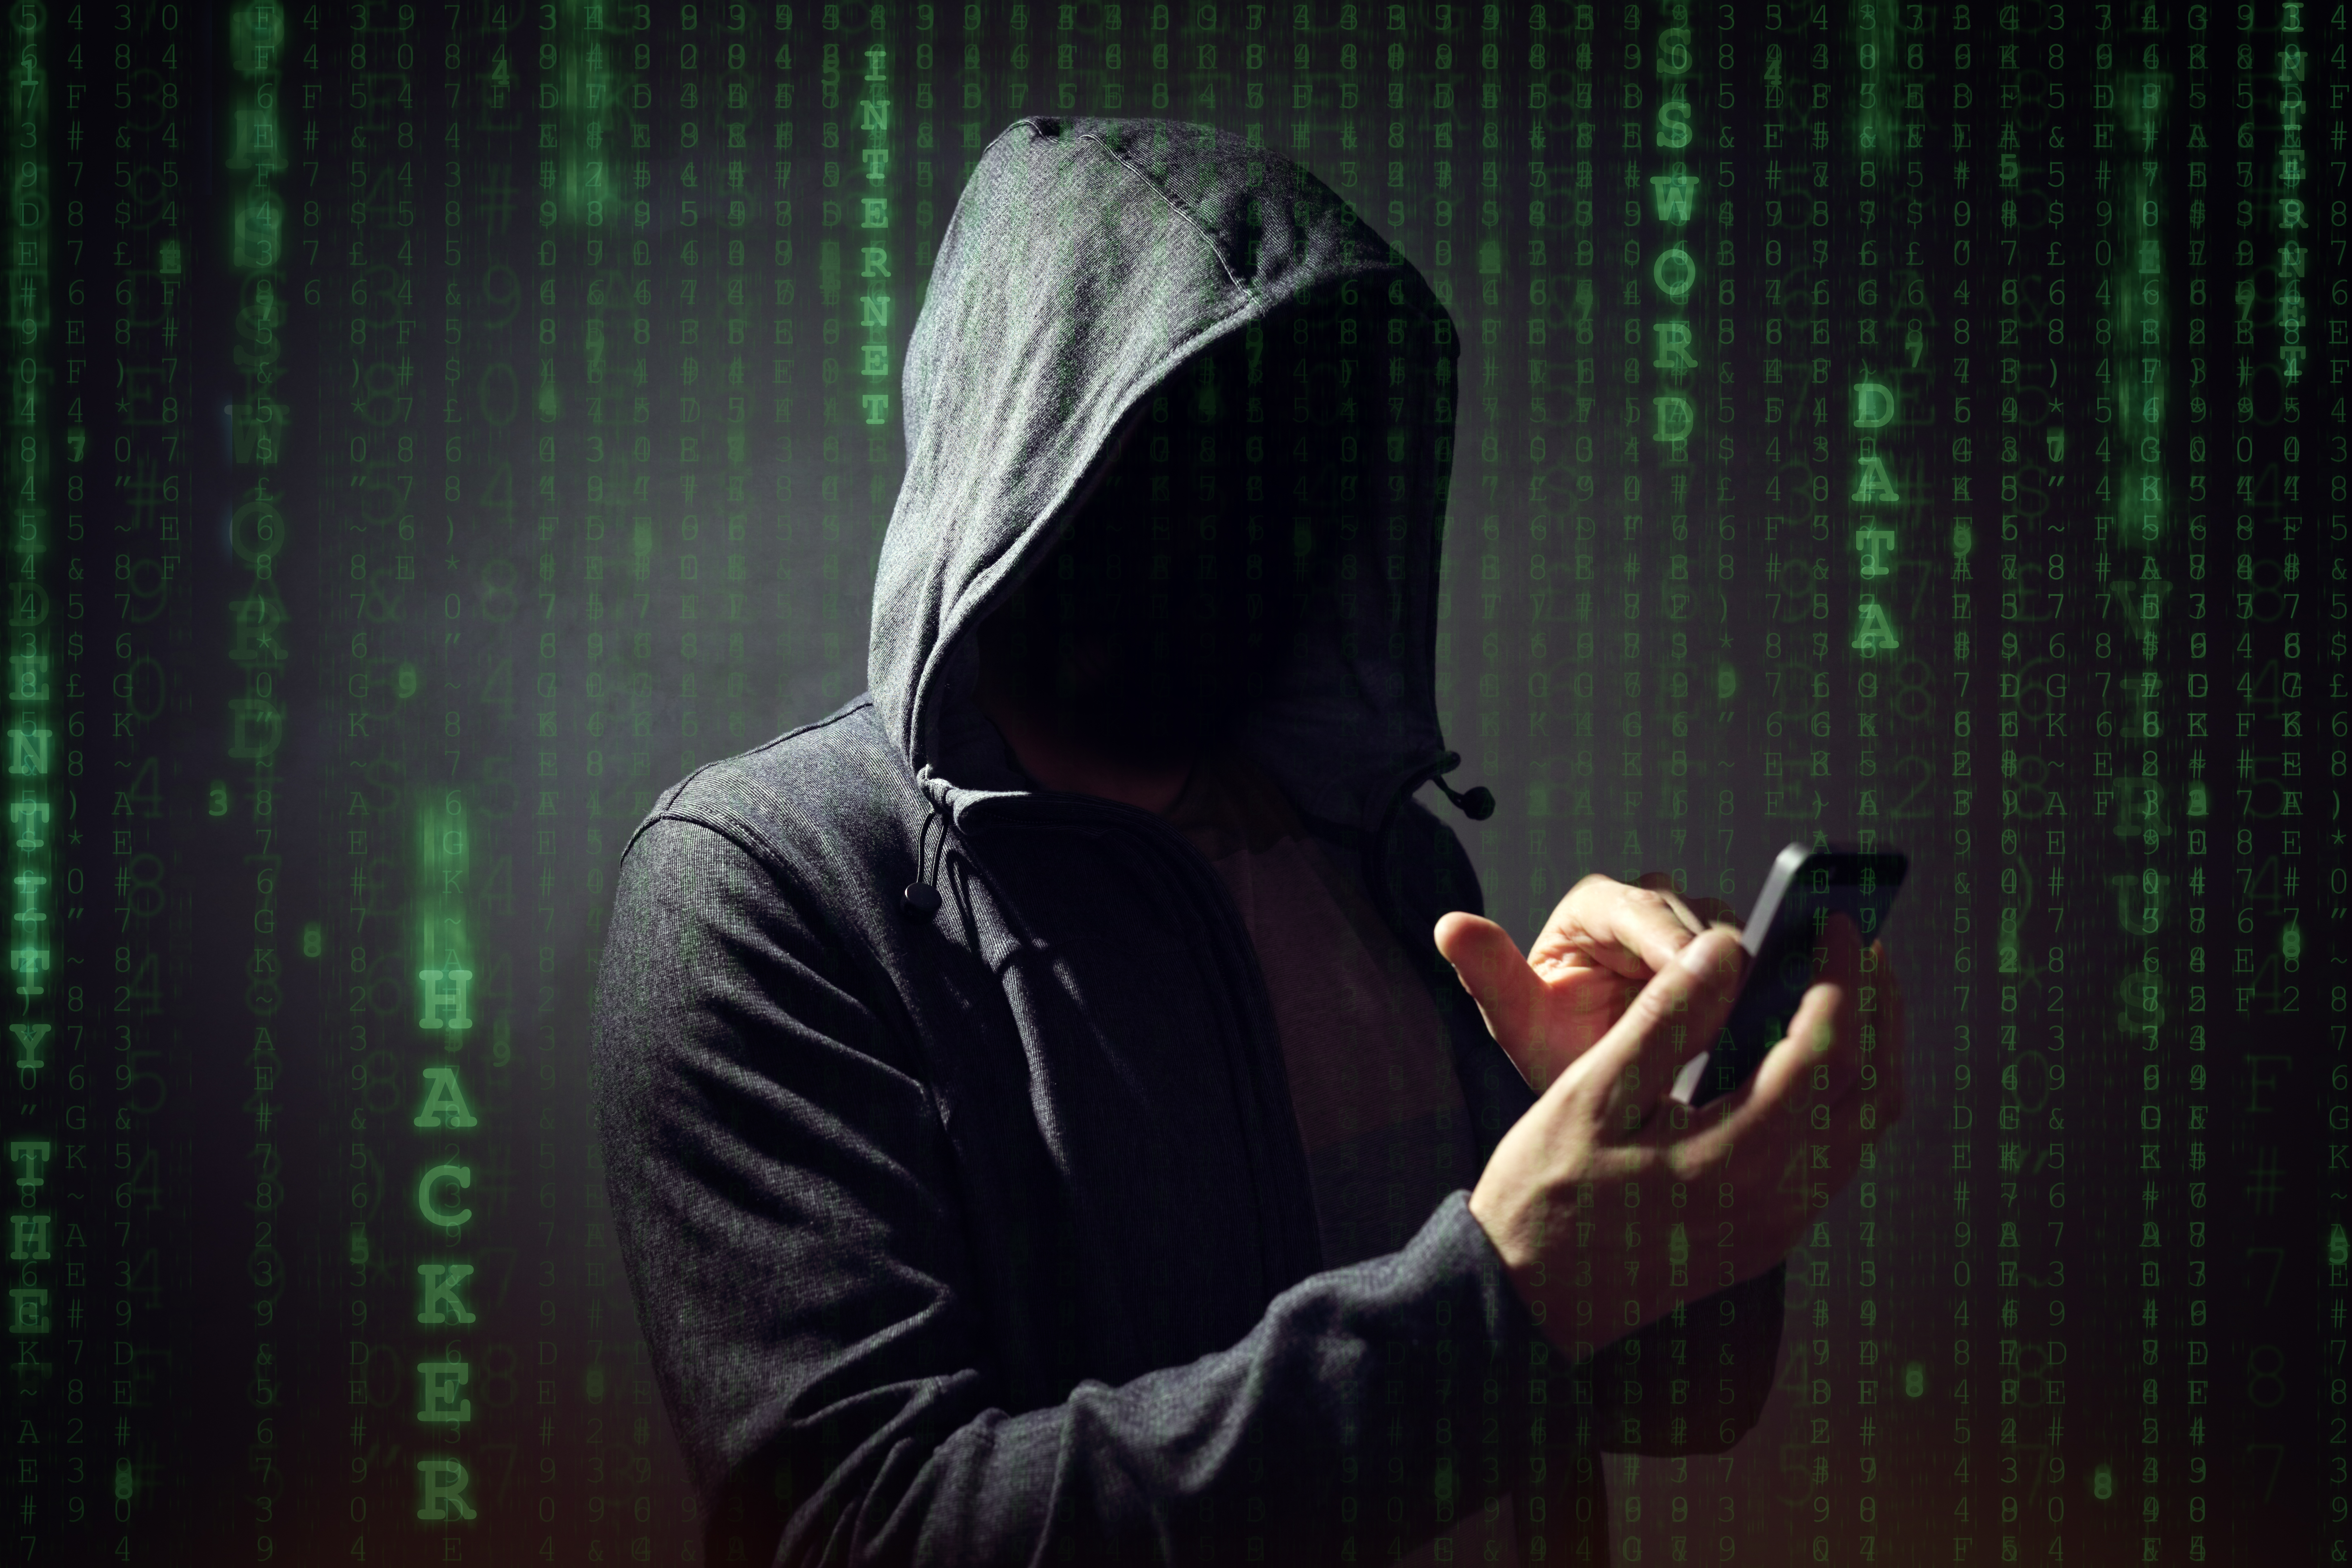 There are five signs that you can be on the lookout for to help identify if your phone has been breached with a virus